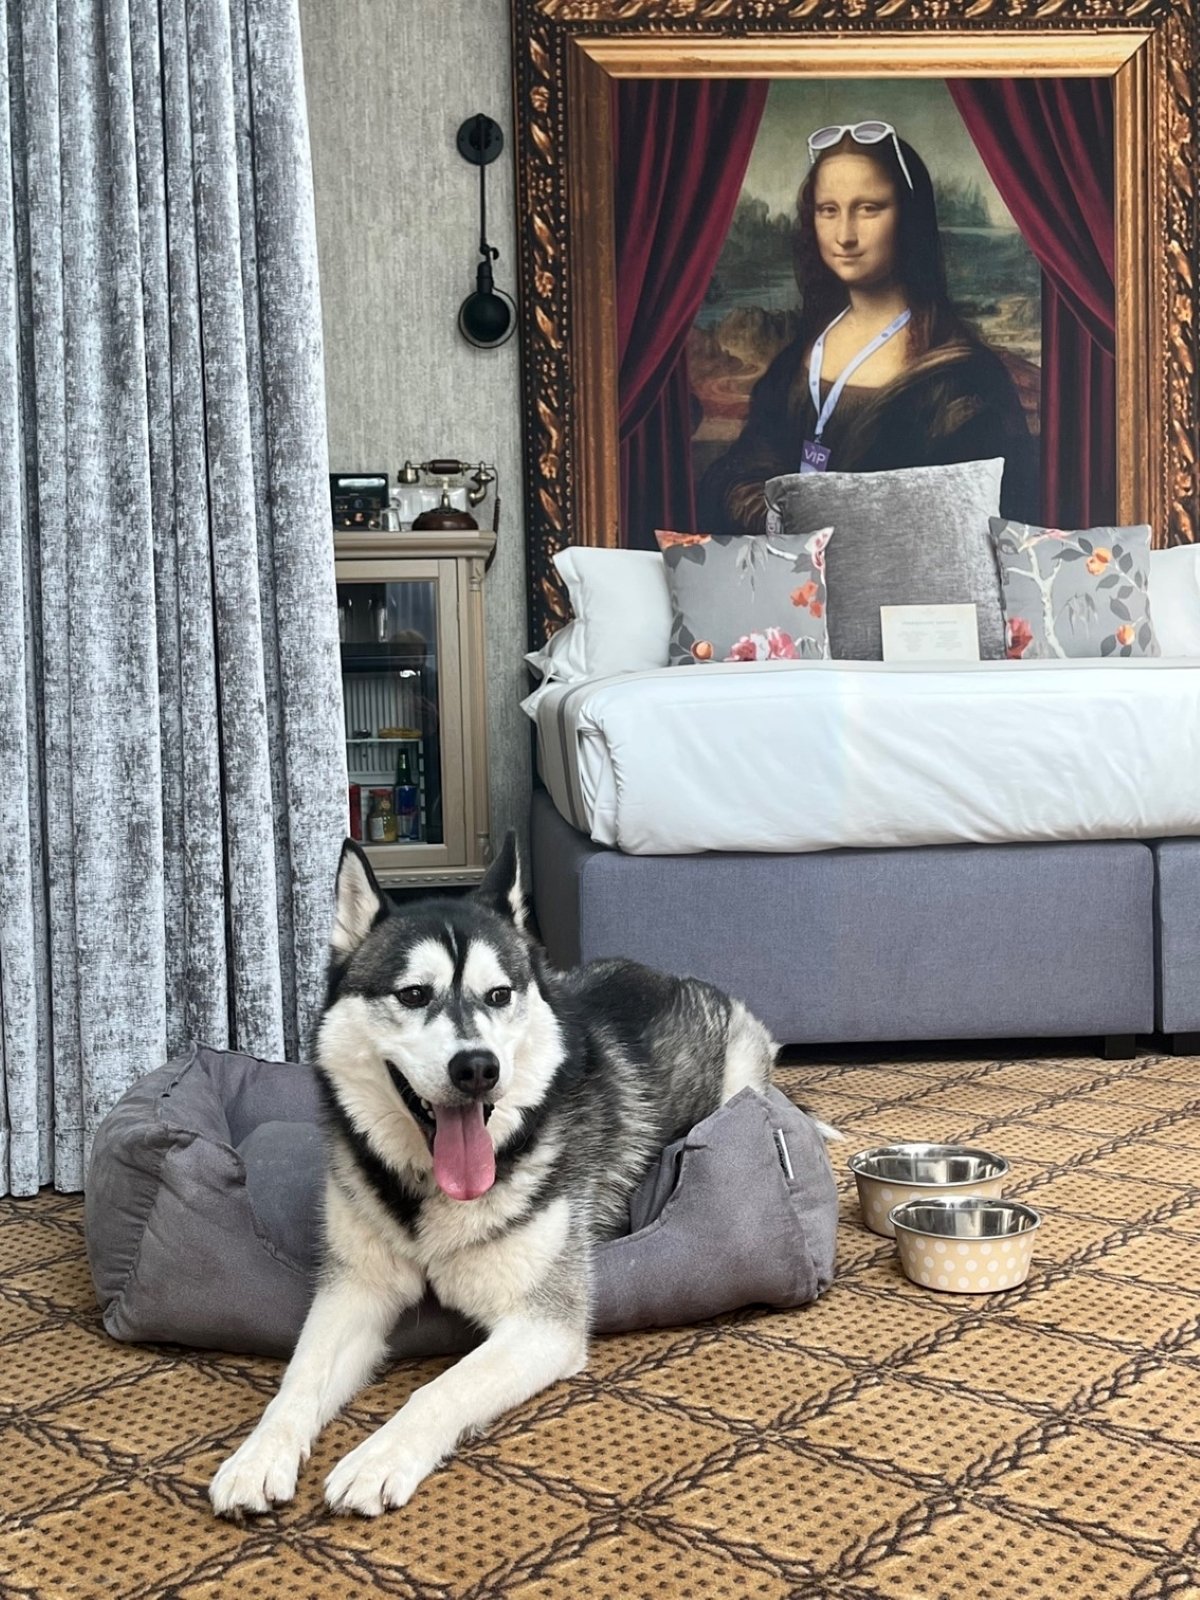 You can follow legends and mysteries with your dog in the breathtaking Mystery Hotel Budapest